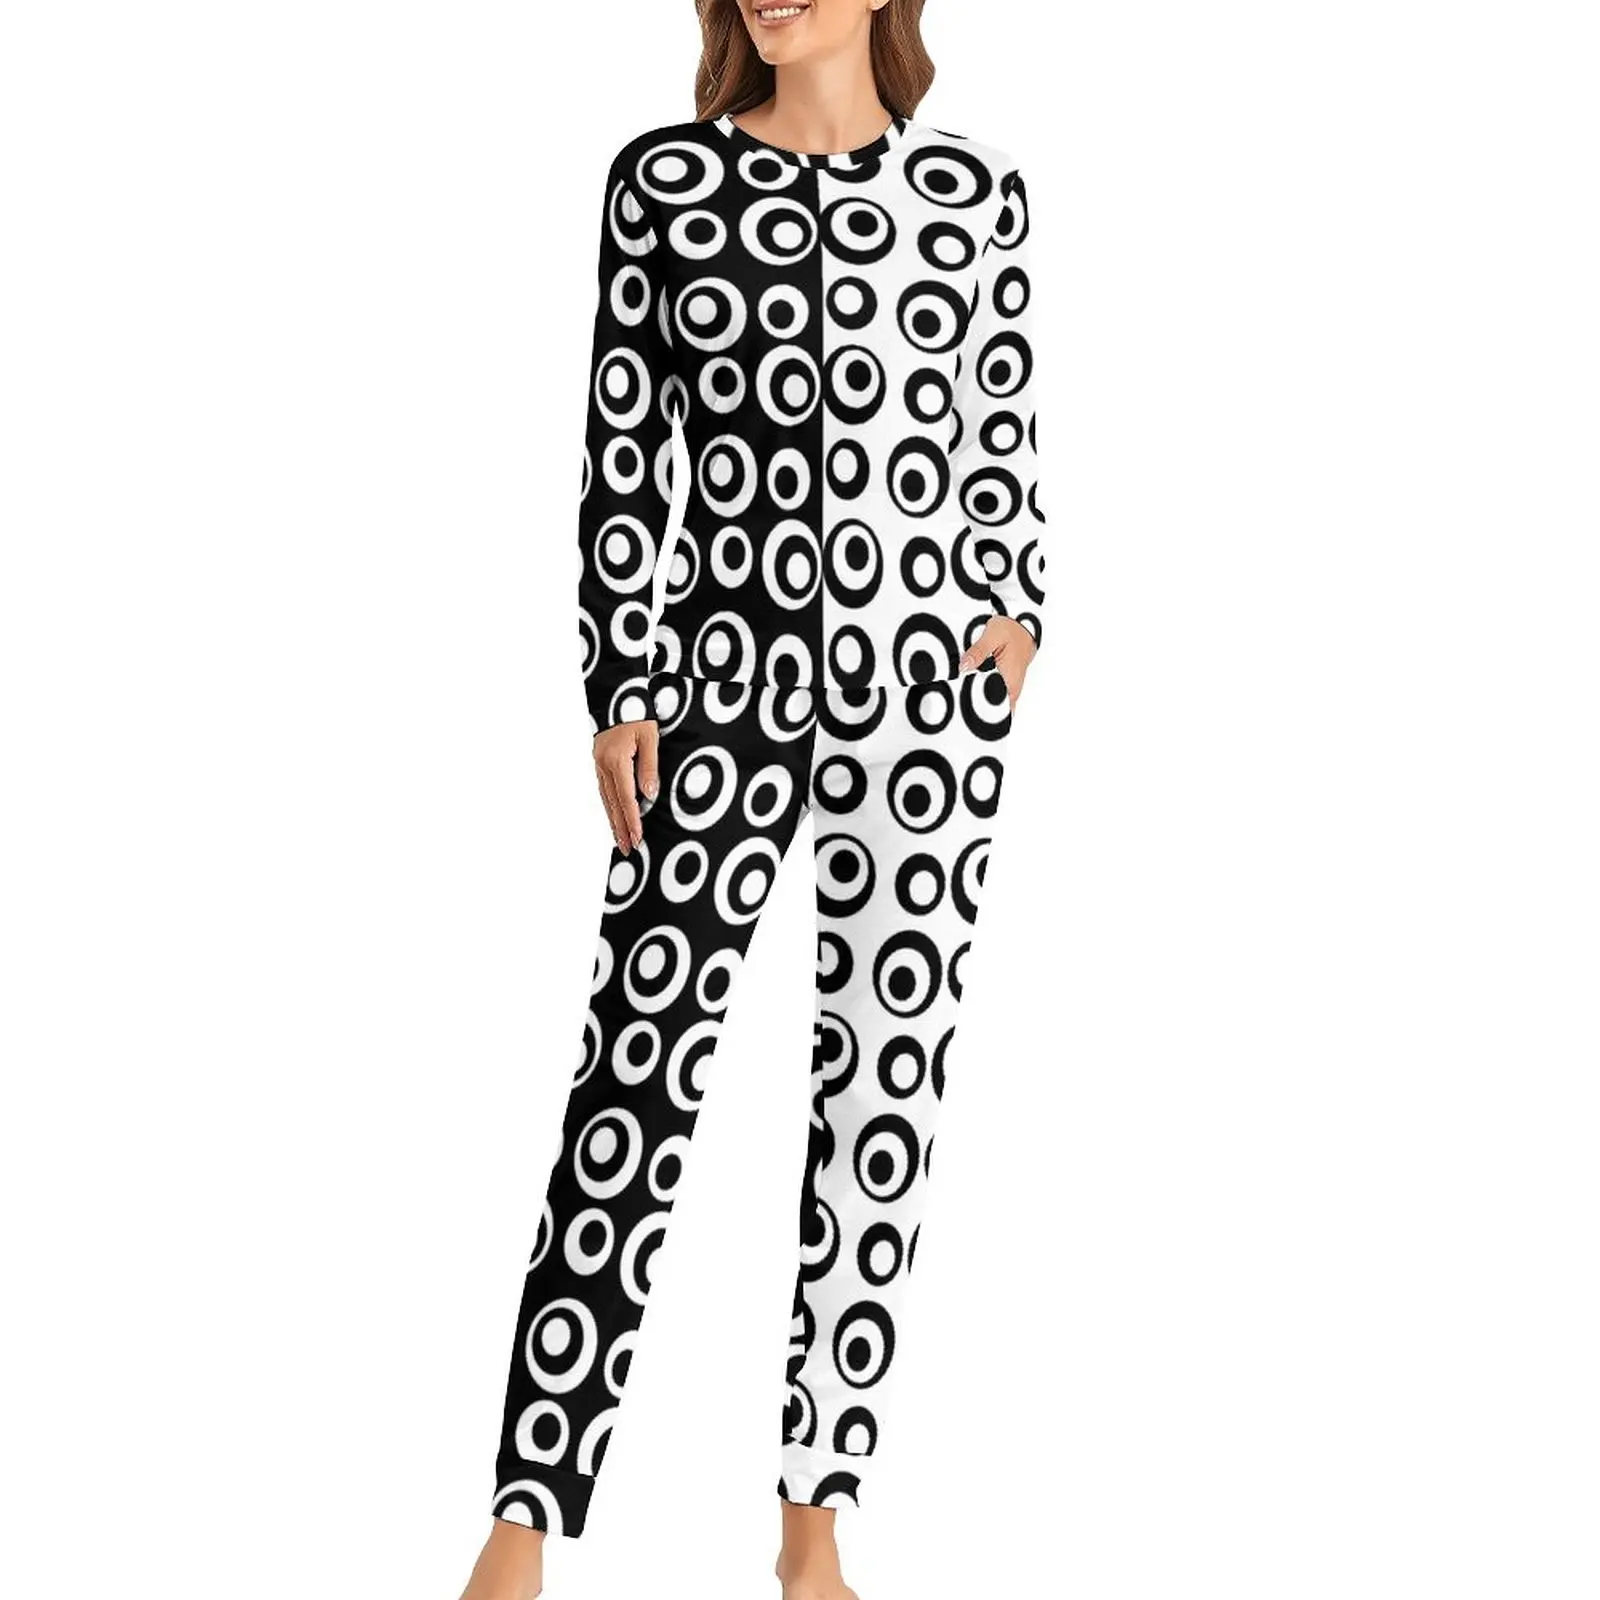 

Black And White Two Tone Pajamas Mod Love Circles Dots Casual Oversized Sleepwear Women Two Piece Graphic Pajama Sets Home Suit